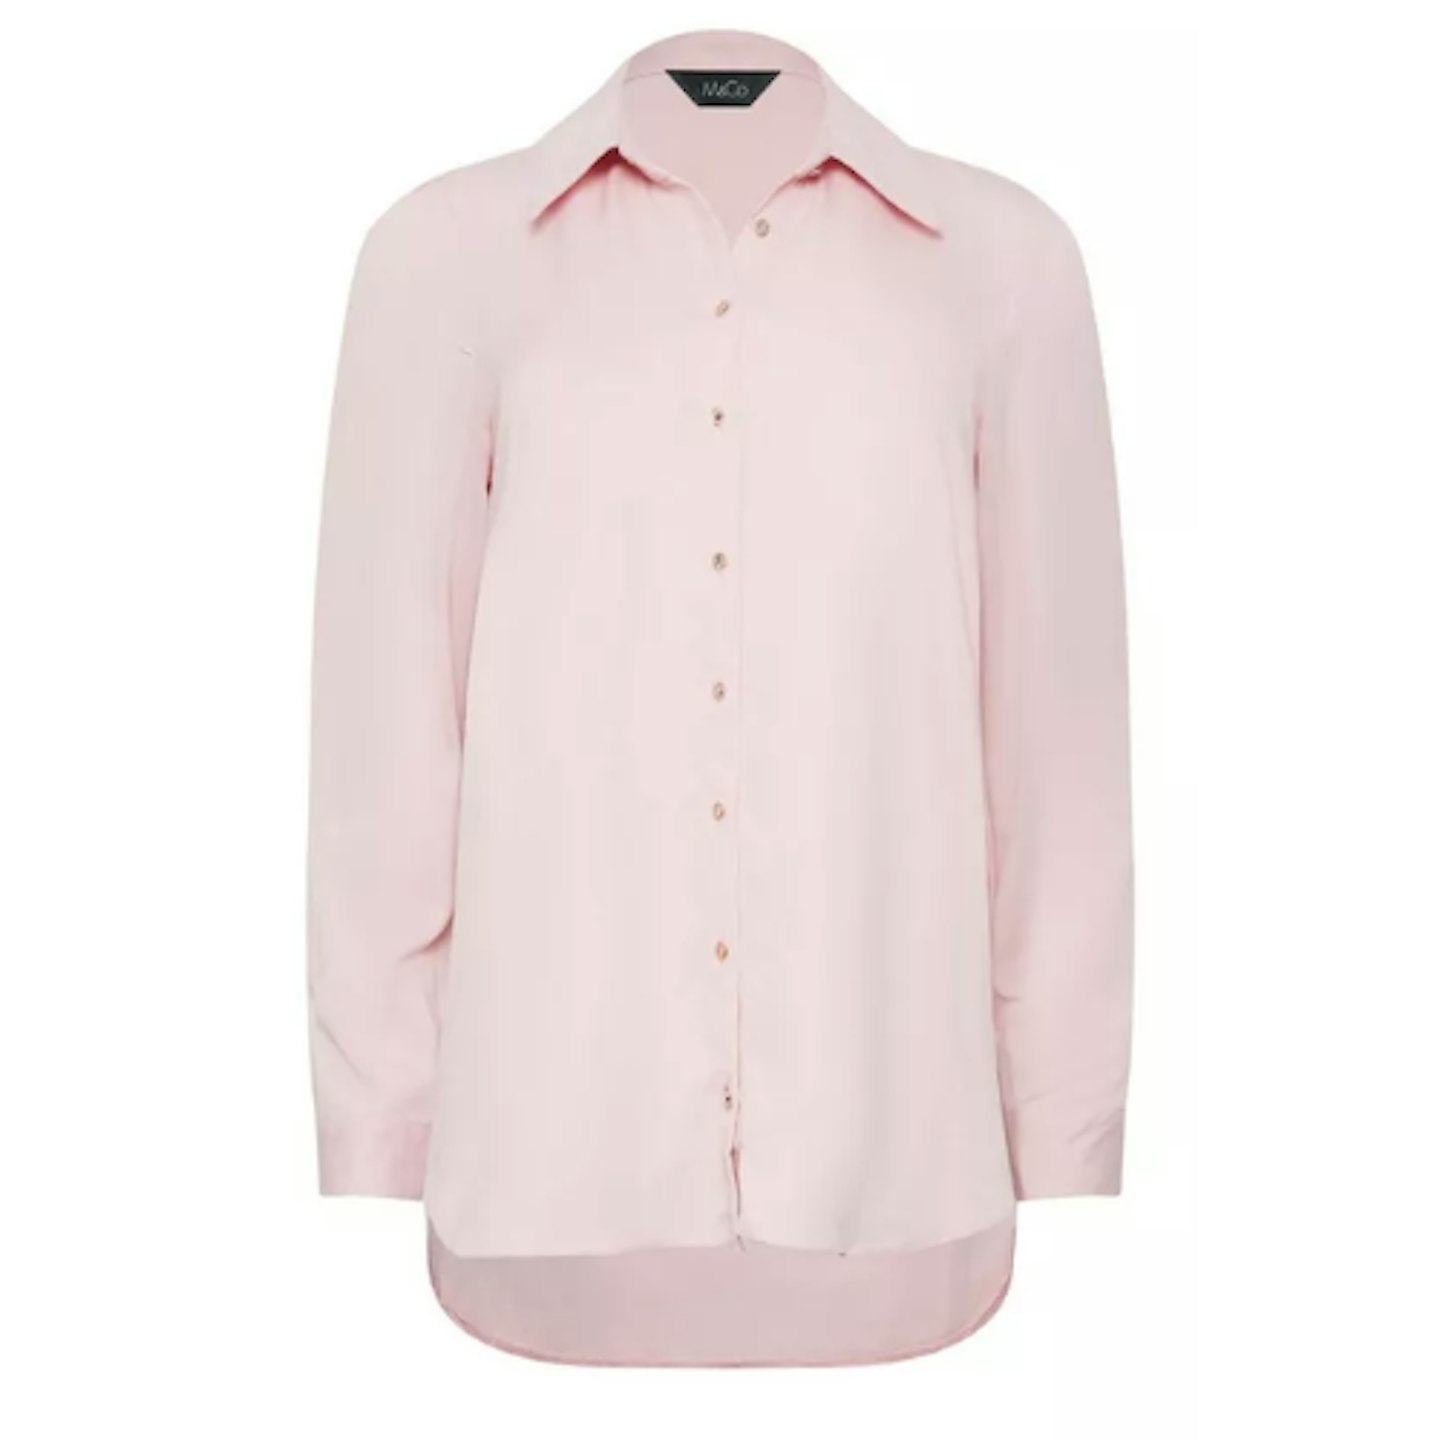 Claudia's Pink Blouse Dupe